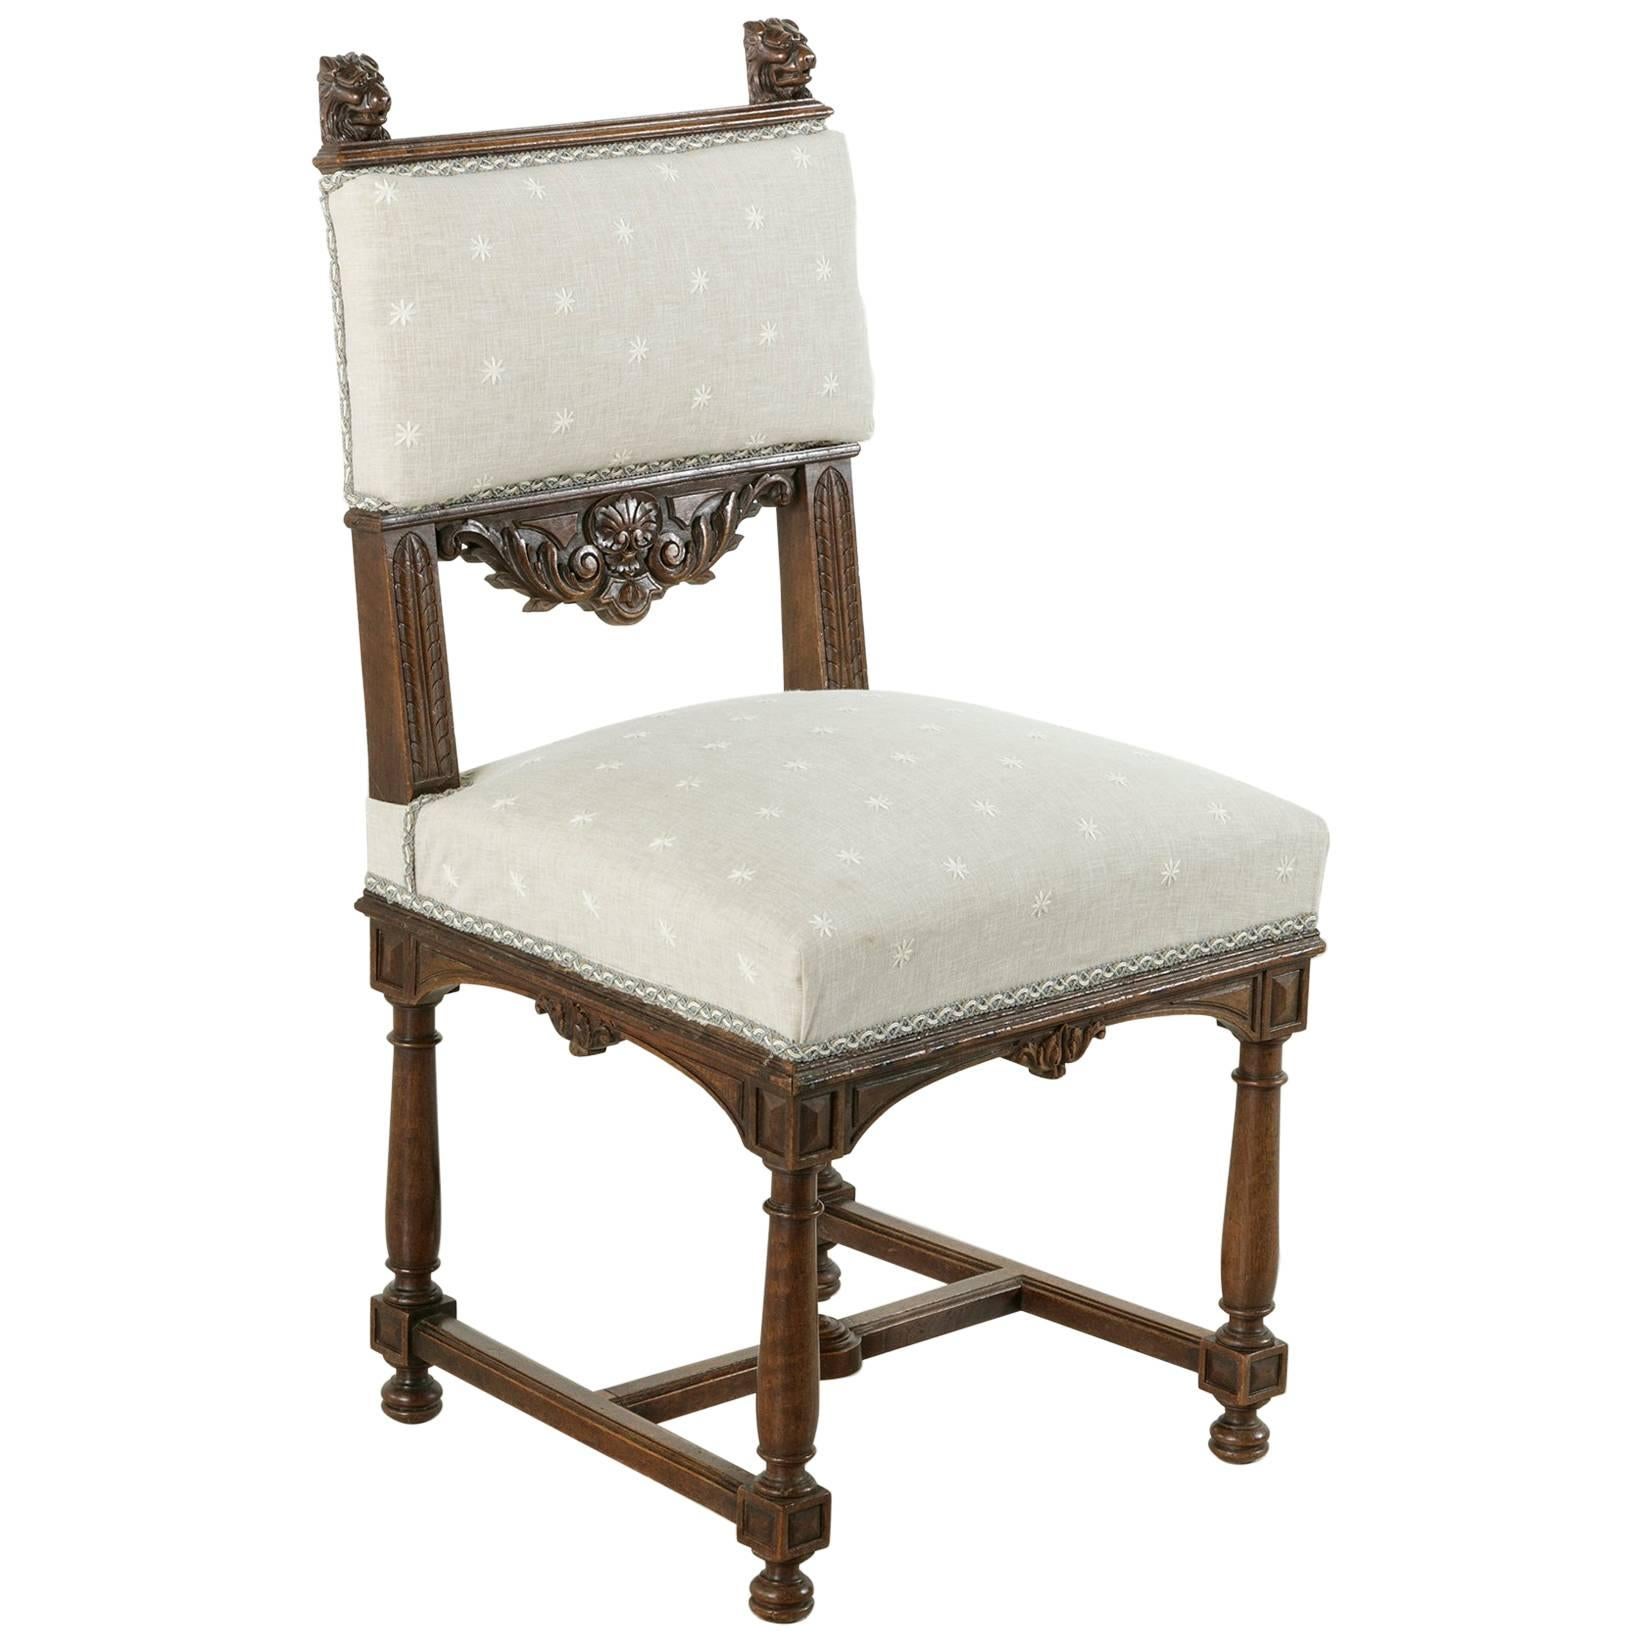 Late 19th Century French Hand-Carved Walnut Henri II Style Side Chair with Lions